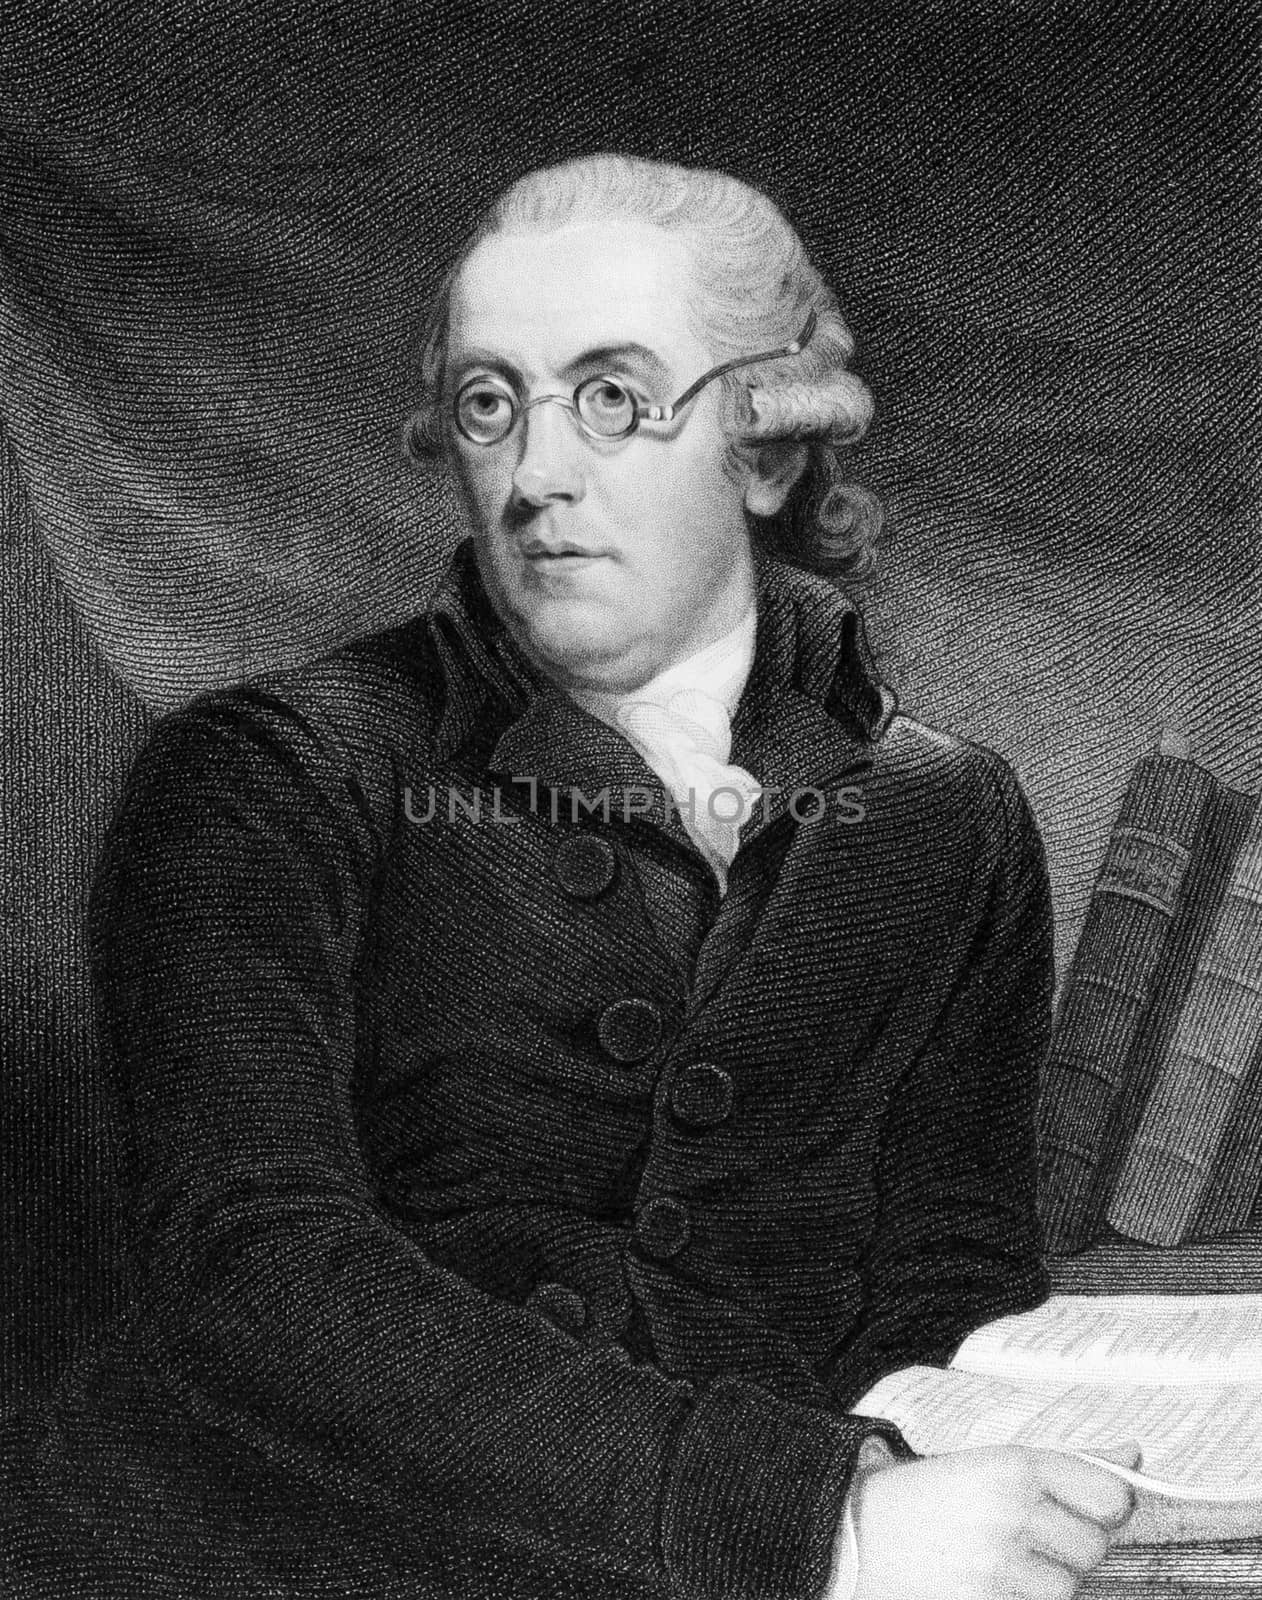 Robert Nares (1753-1829) on engraving from 1835. English clergyman, philologist and author. Engraved by S.Freeman after J.Hoppner and published in "National Portrait Gallery'',UK,1835.